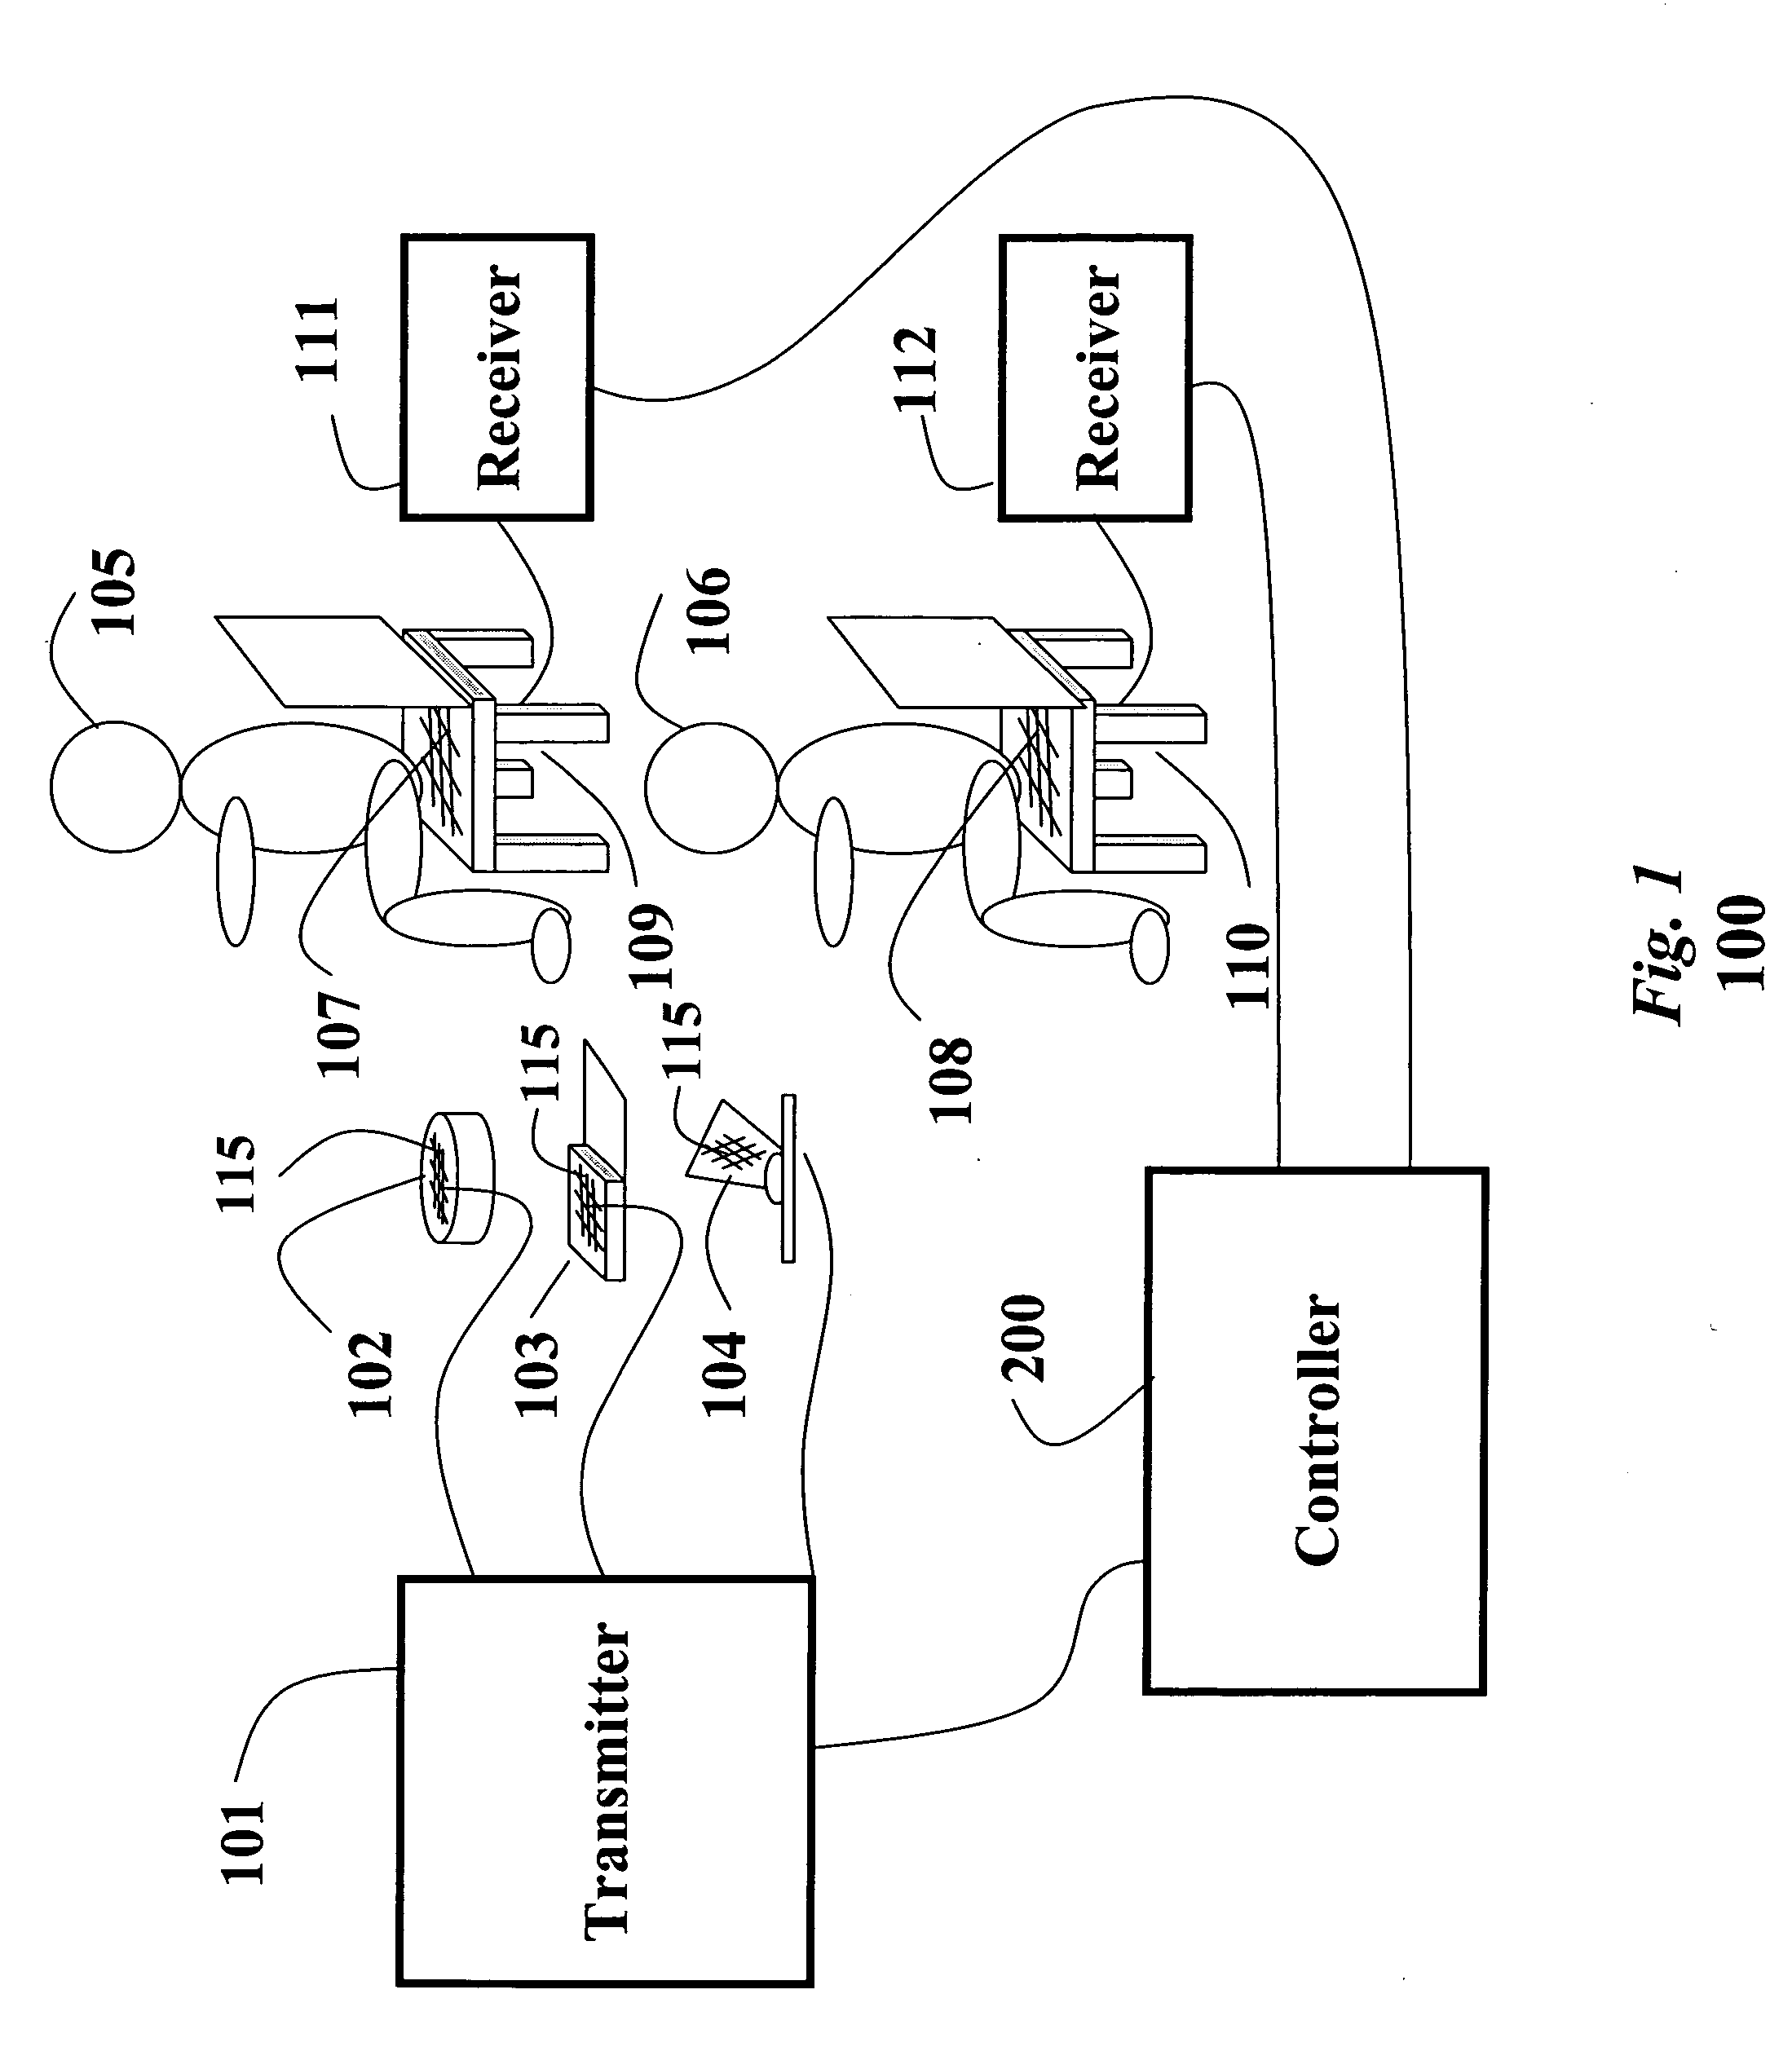 Control system and method for differentiating multiple users utilizing multi-view display devices